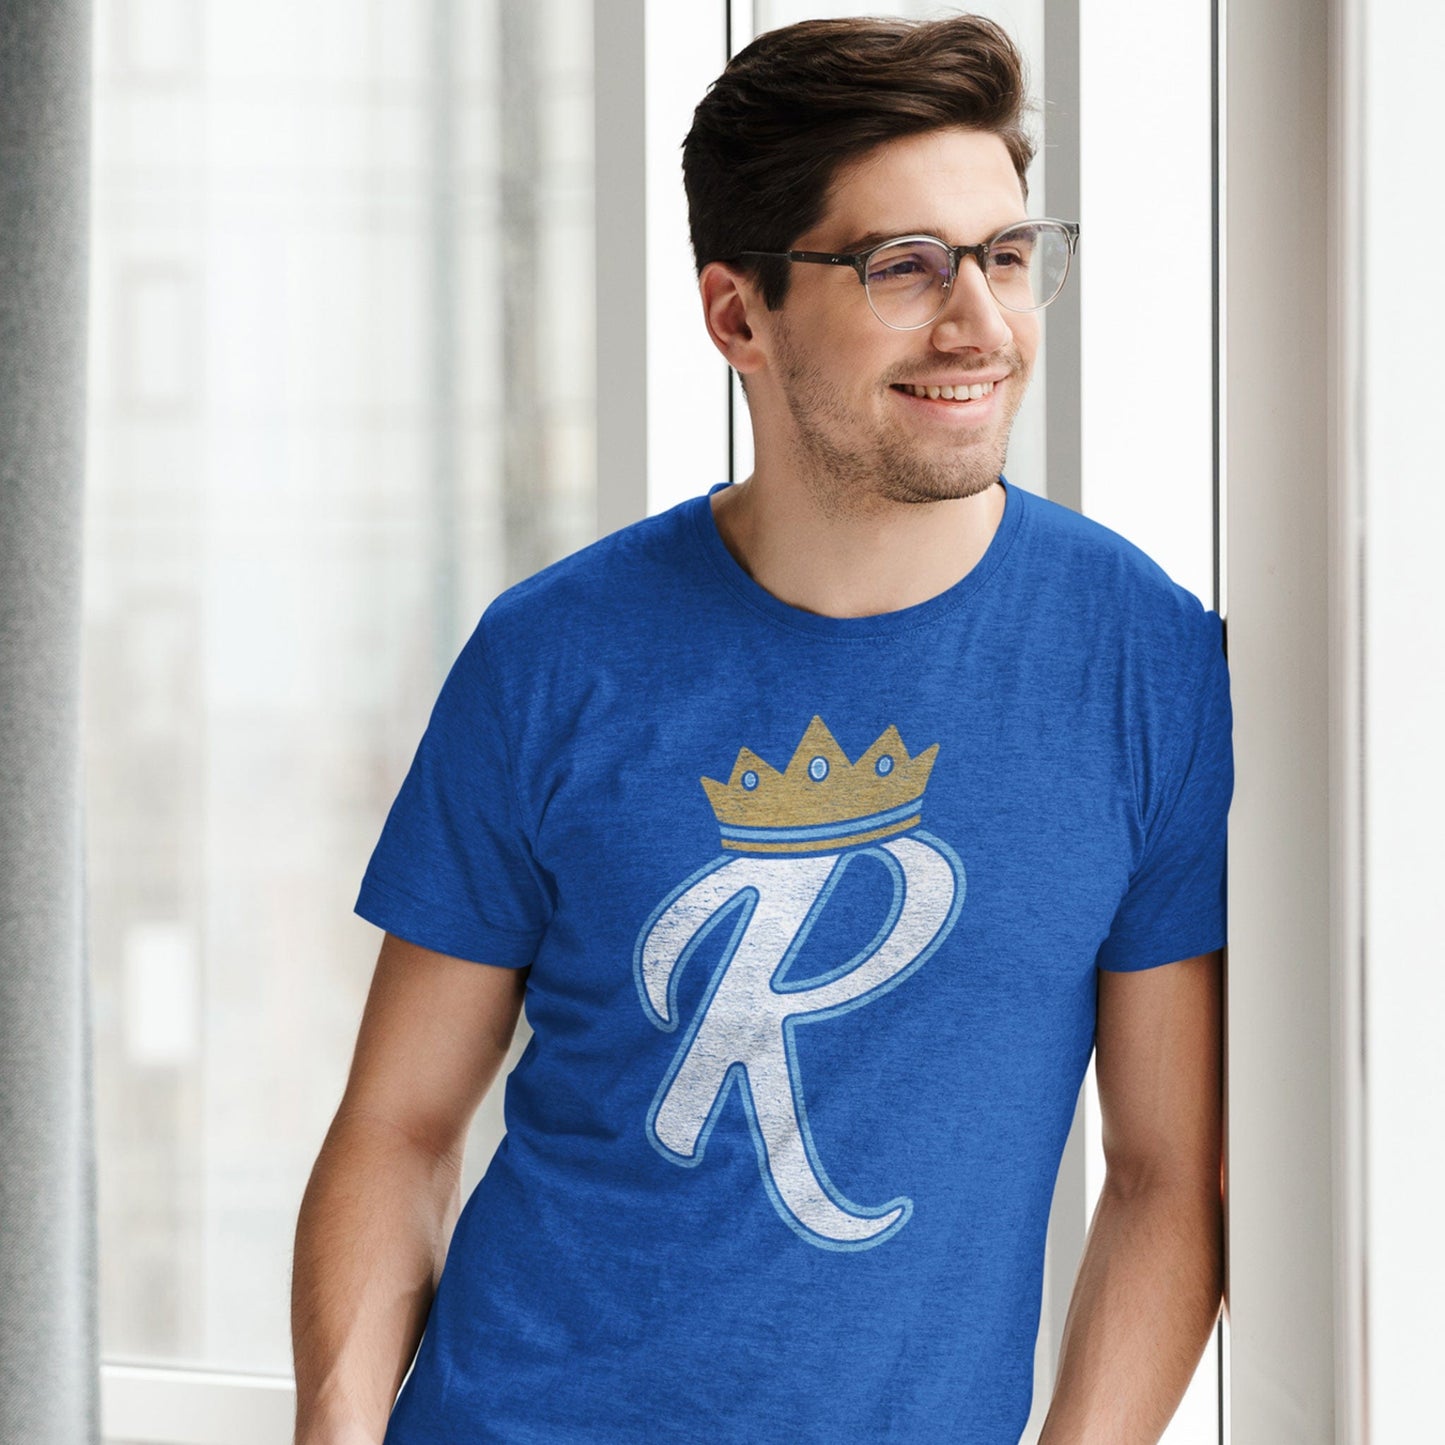 KC Swag Kansas City Royals lite blue/white BOLD R wearing Gold CROWN on heather royal blue t-shirt worn by male model leaning against wall near window